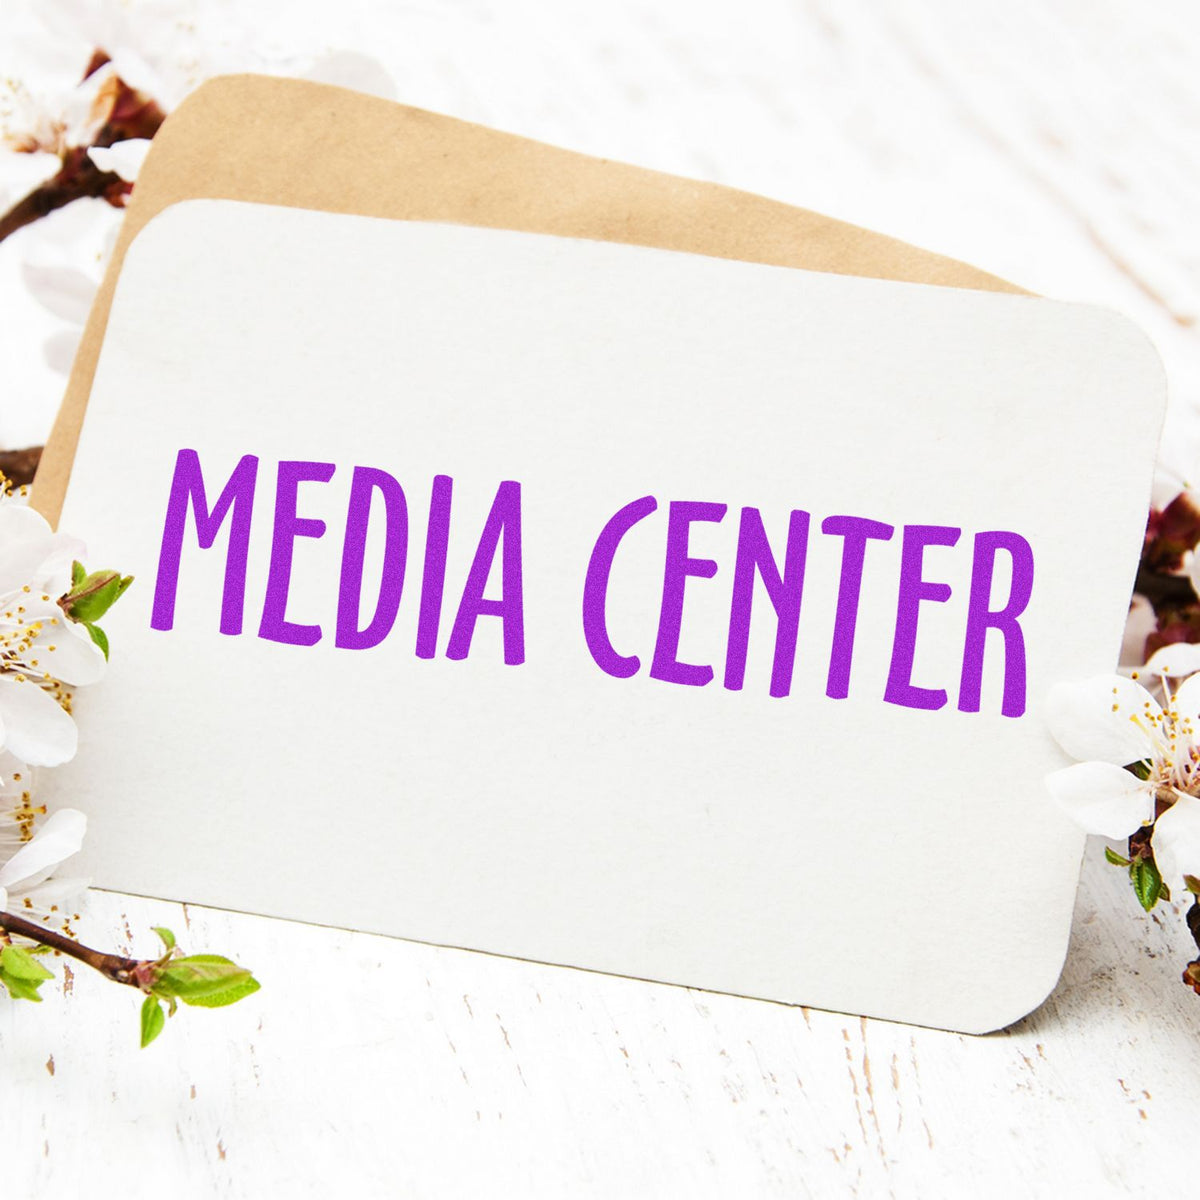 Large Media Center Rubber Stamp In Use